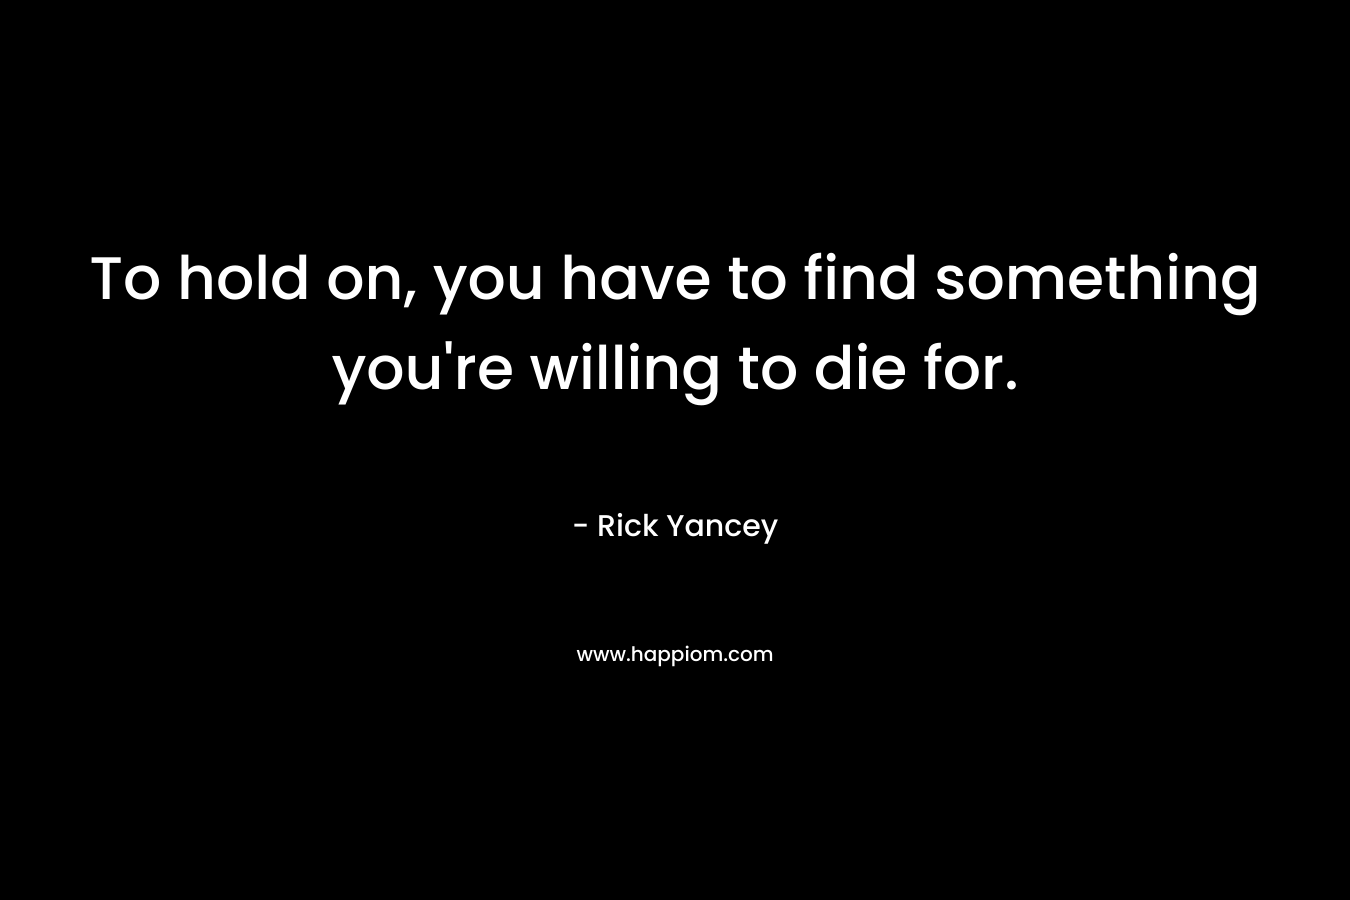 To hold on, you have to find something you're willing to die for.